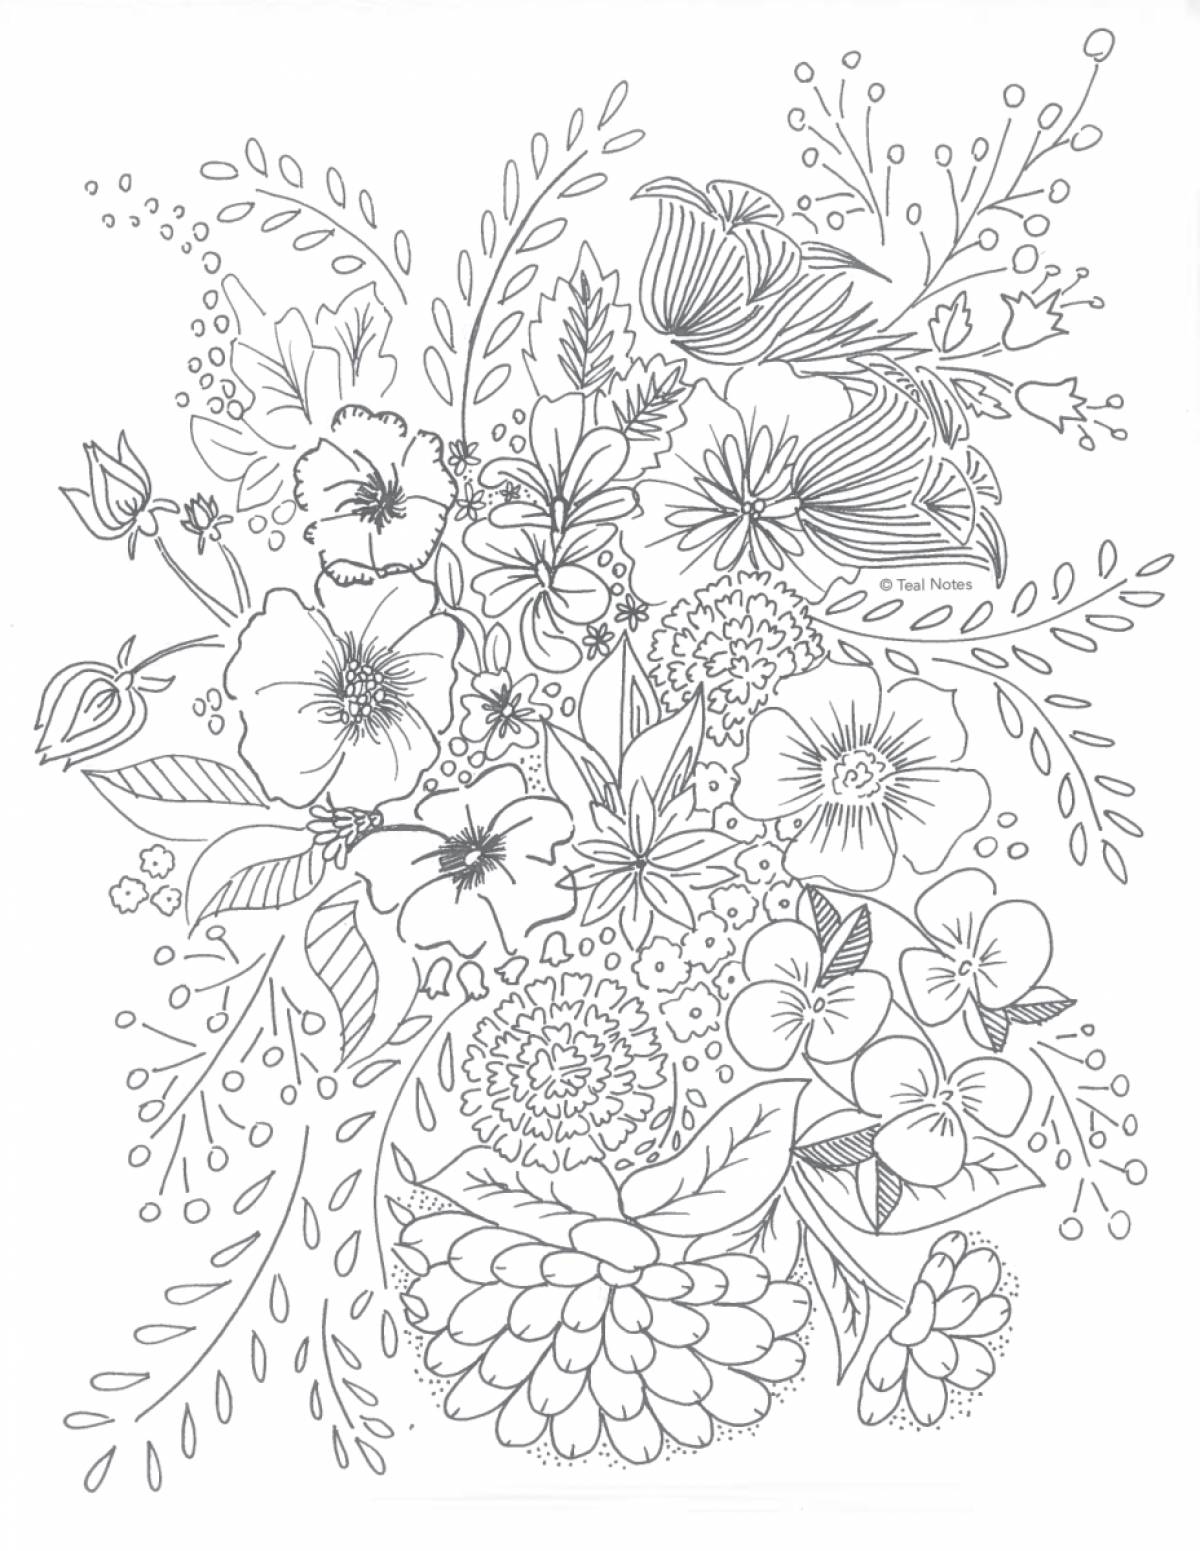 Coloring page soothing autumn bouquet